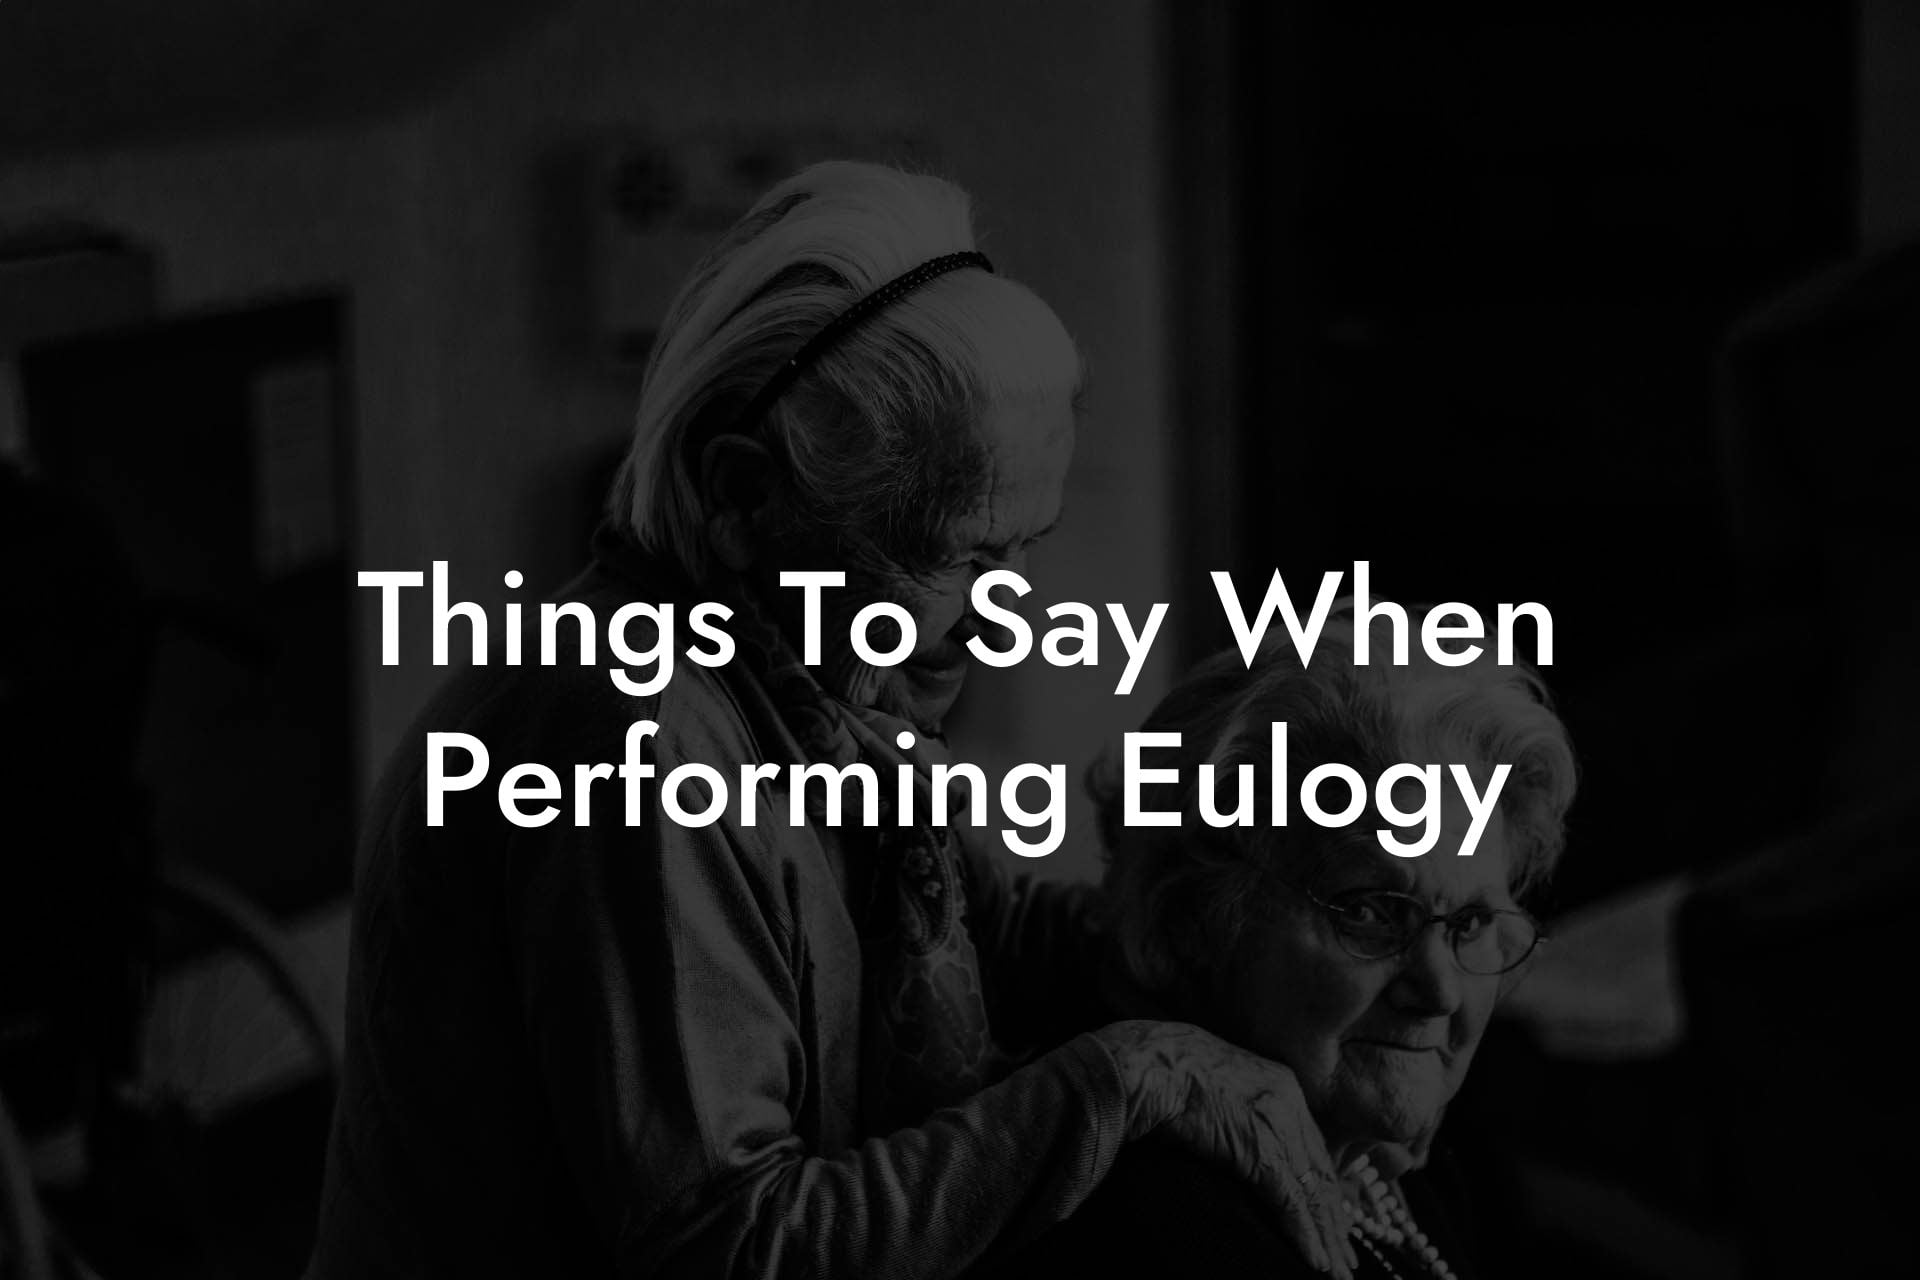 Things To Say When Performing Eulogy